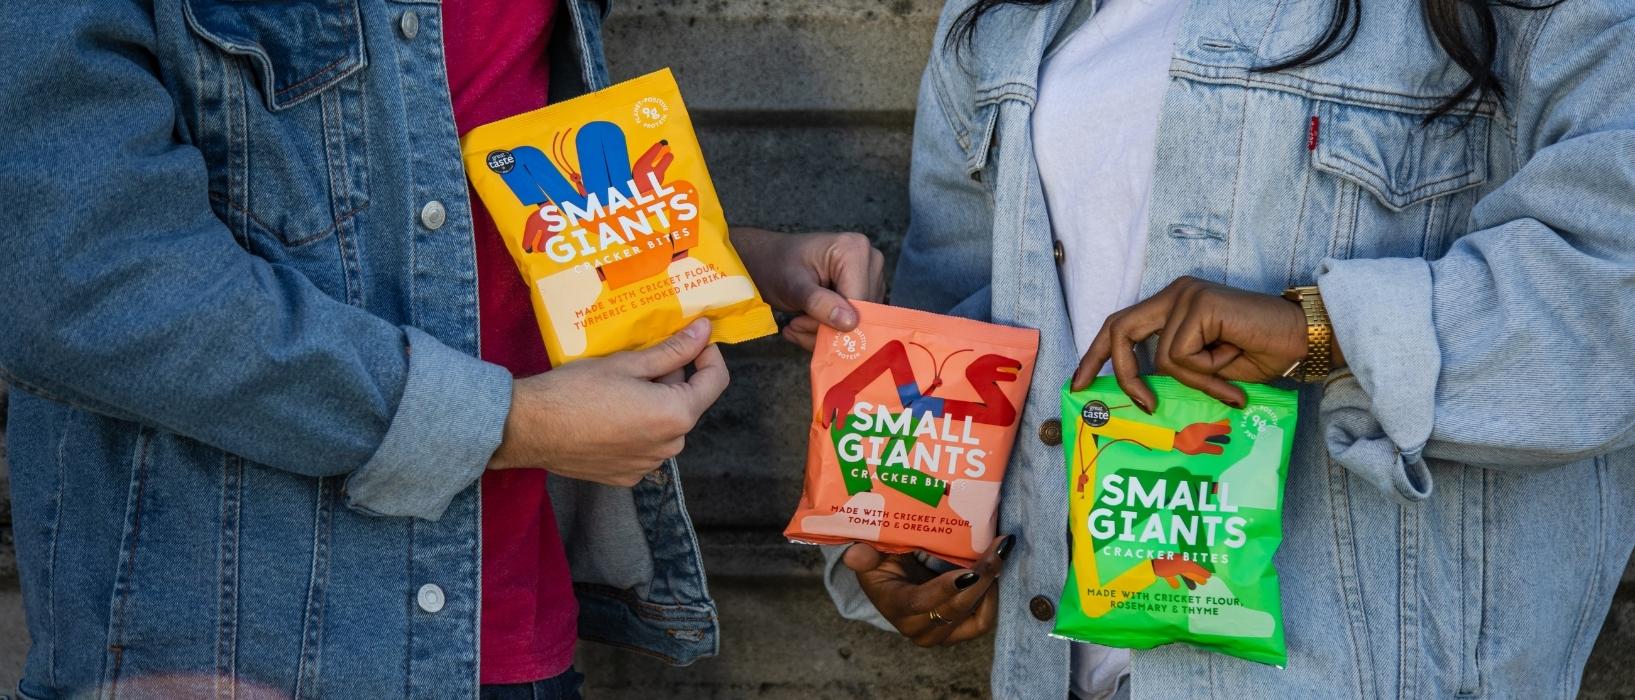 two people shot so you can just see their hands and body, they are holding three brightly coloured crisp packets with the words Small Giants on them